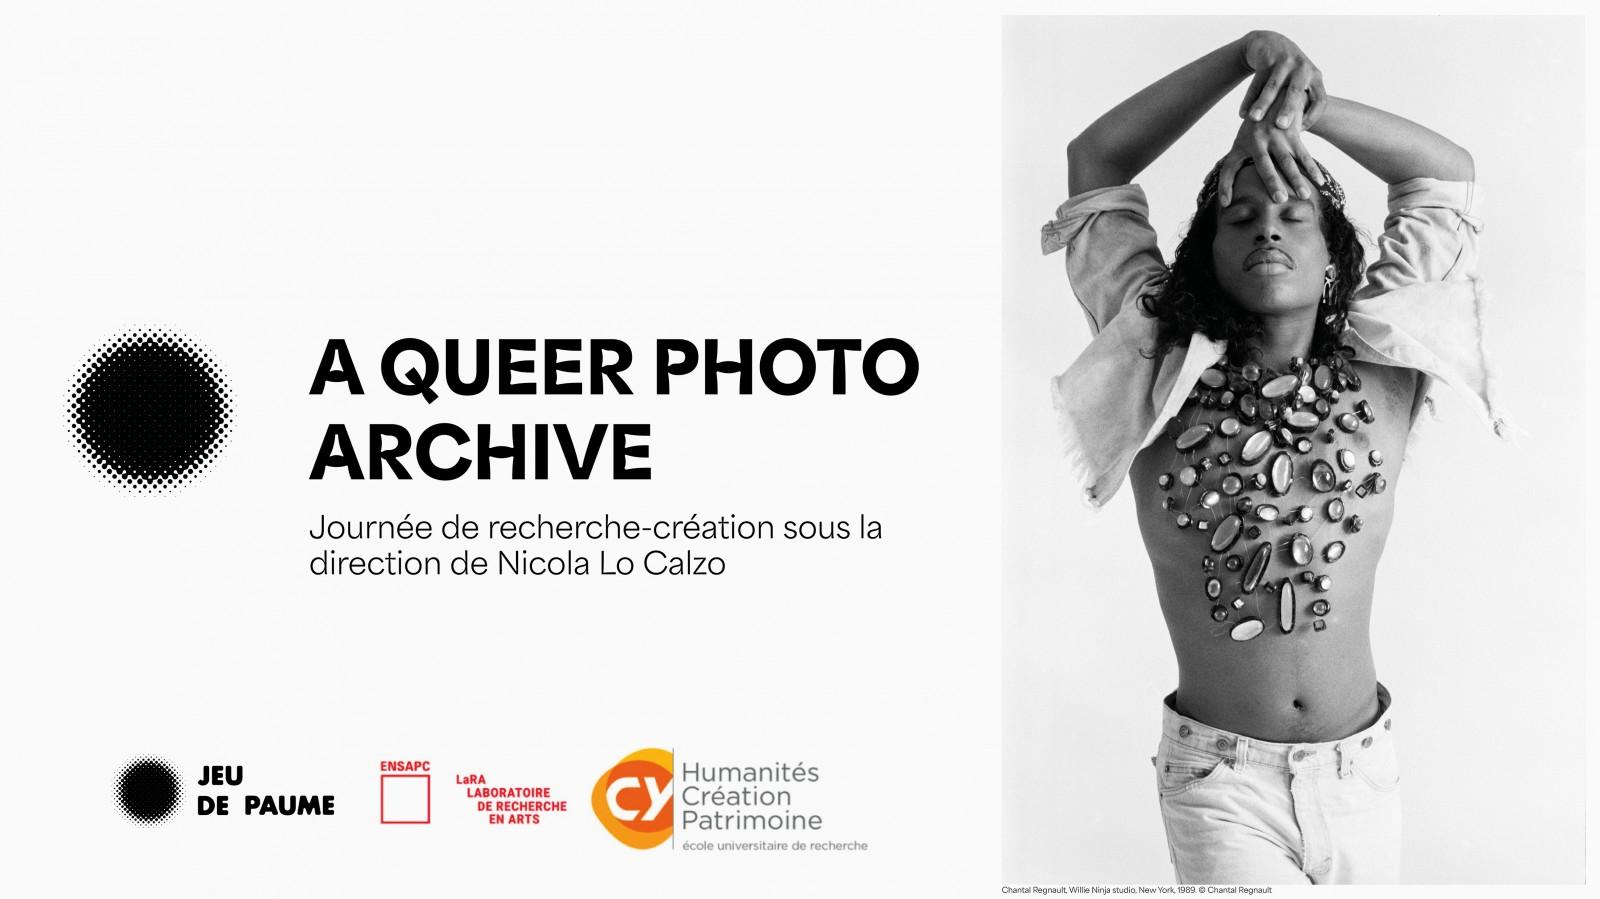 A QUEER PHOTO ARCHIVE